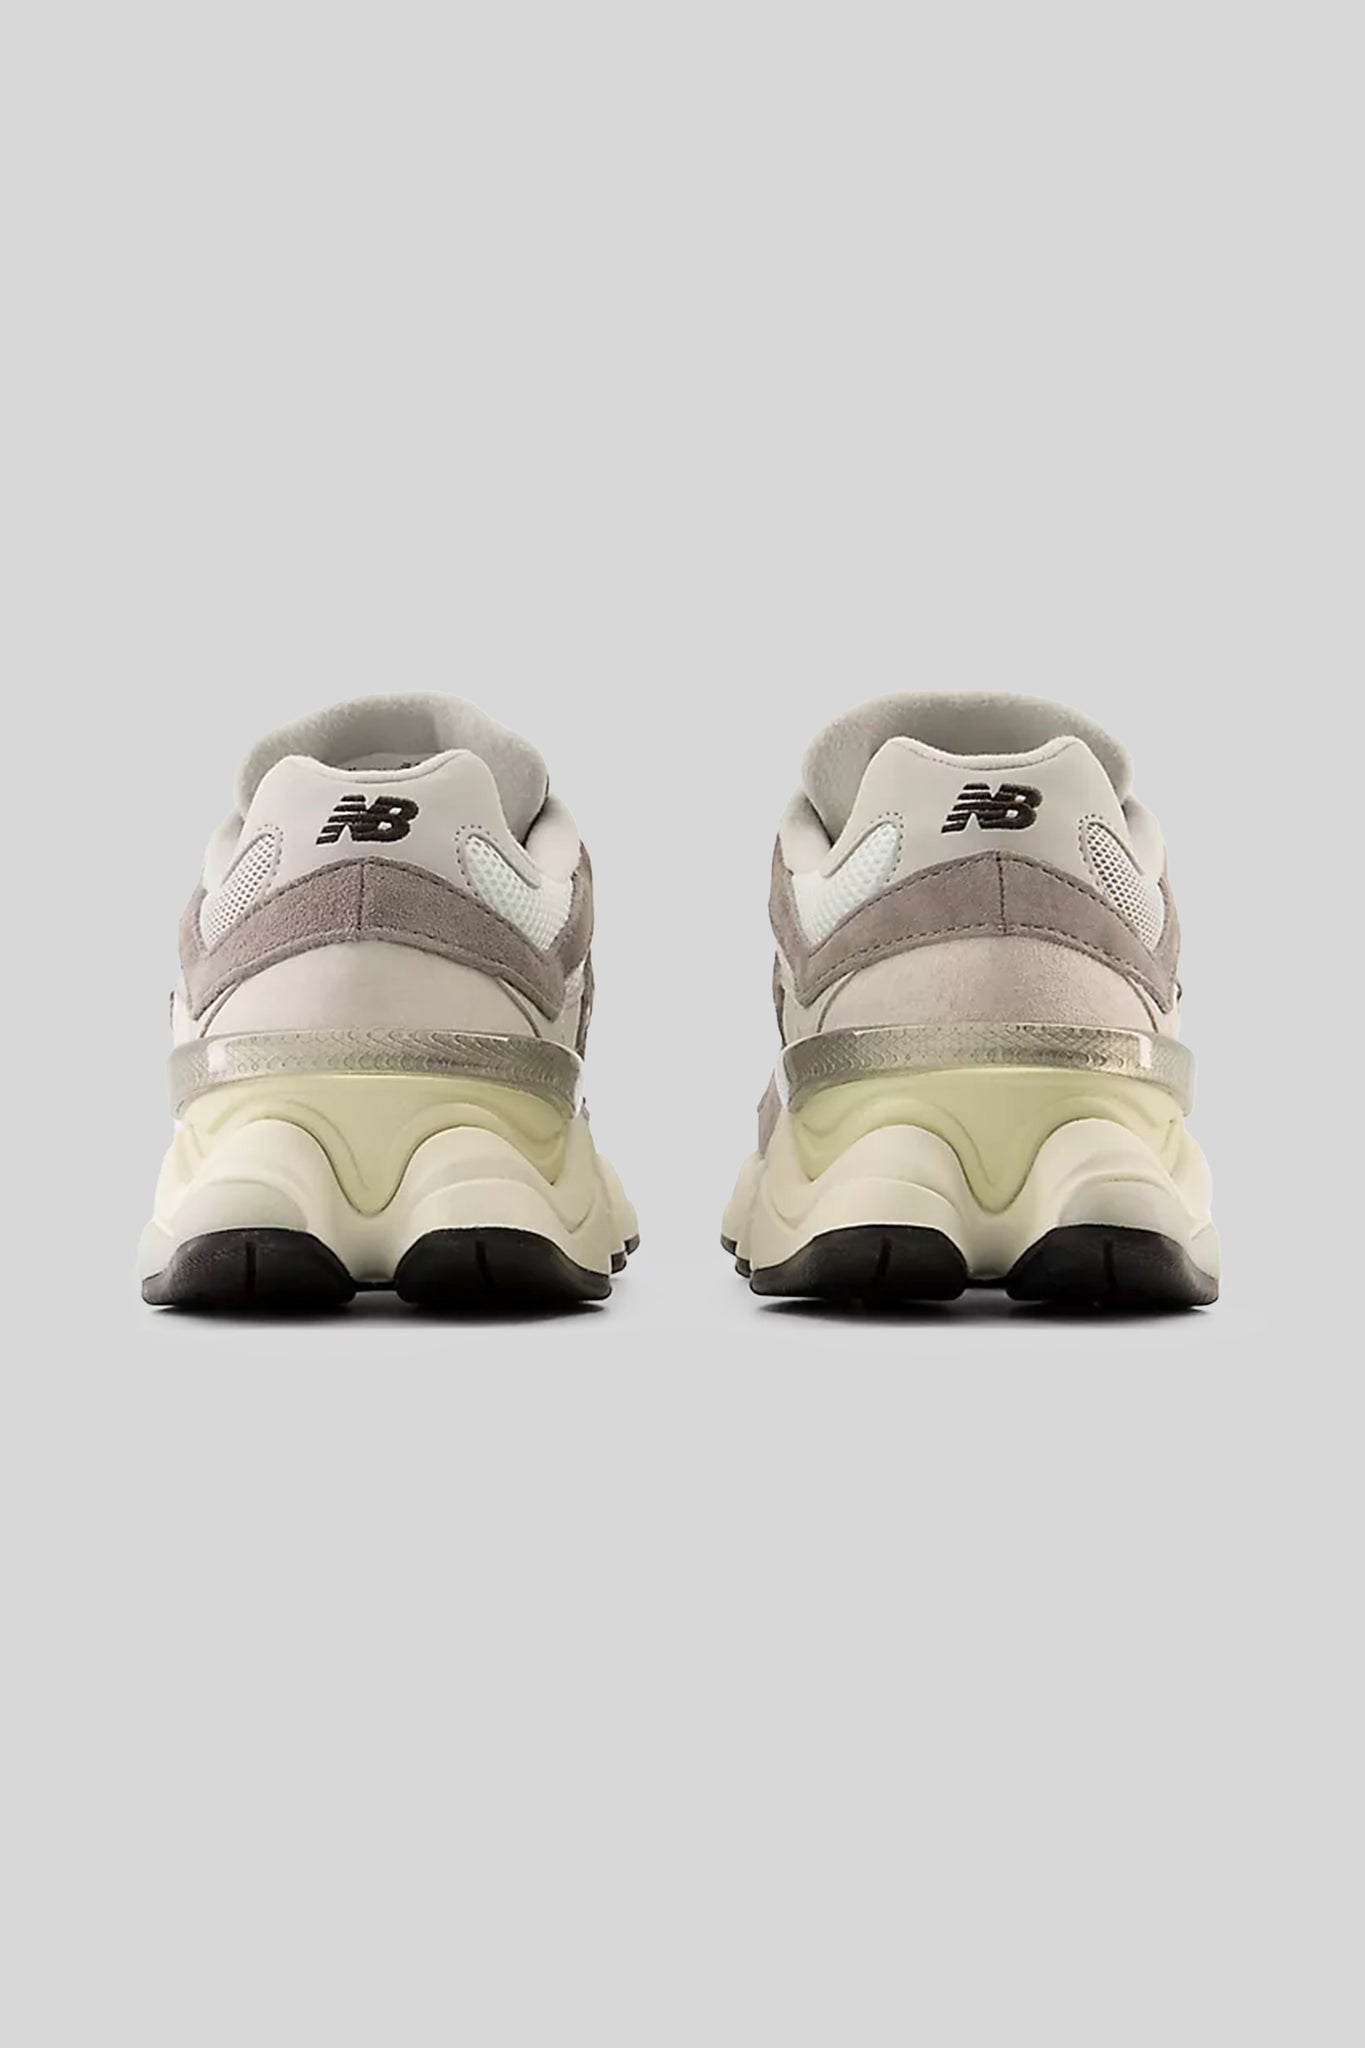 New Balance Unisex 9060 Sneaker in Rain Cloud with Castlerock and White